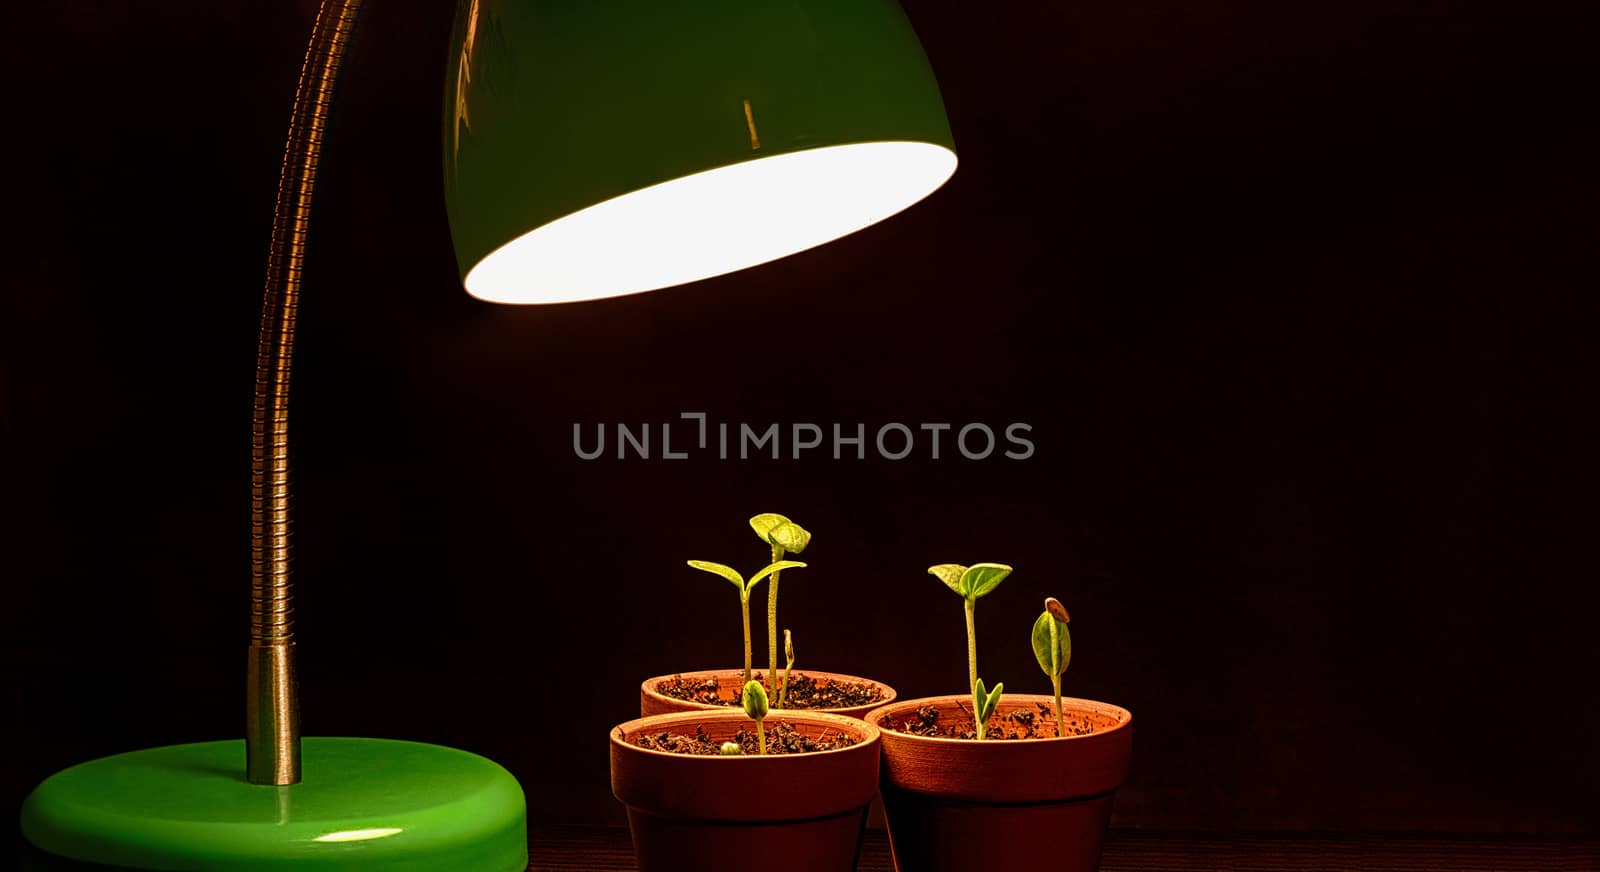 Three Young Sprouts With Grow Lamp by stockbuster1